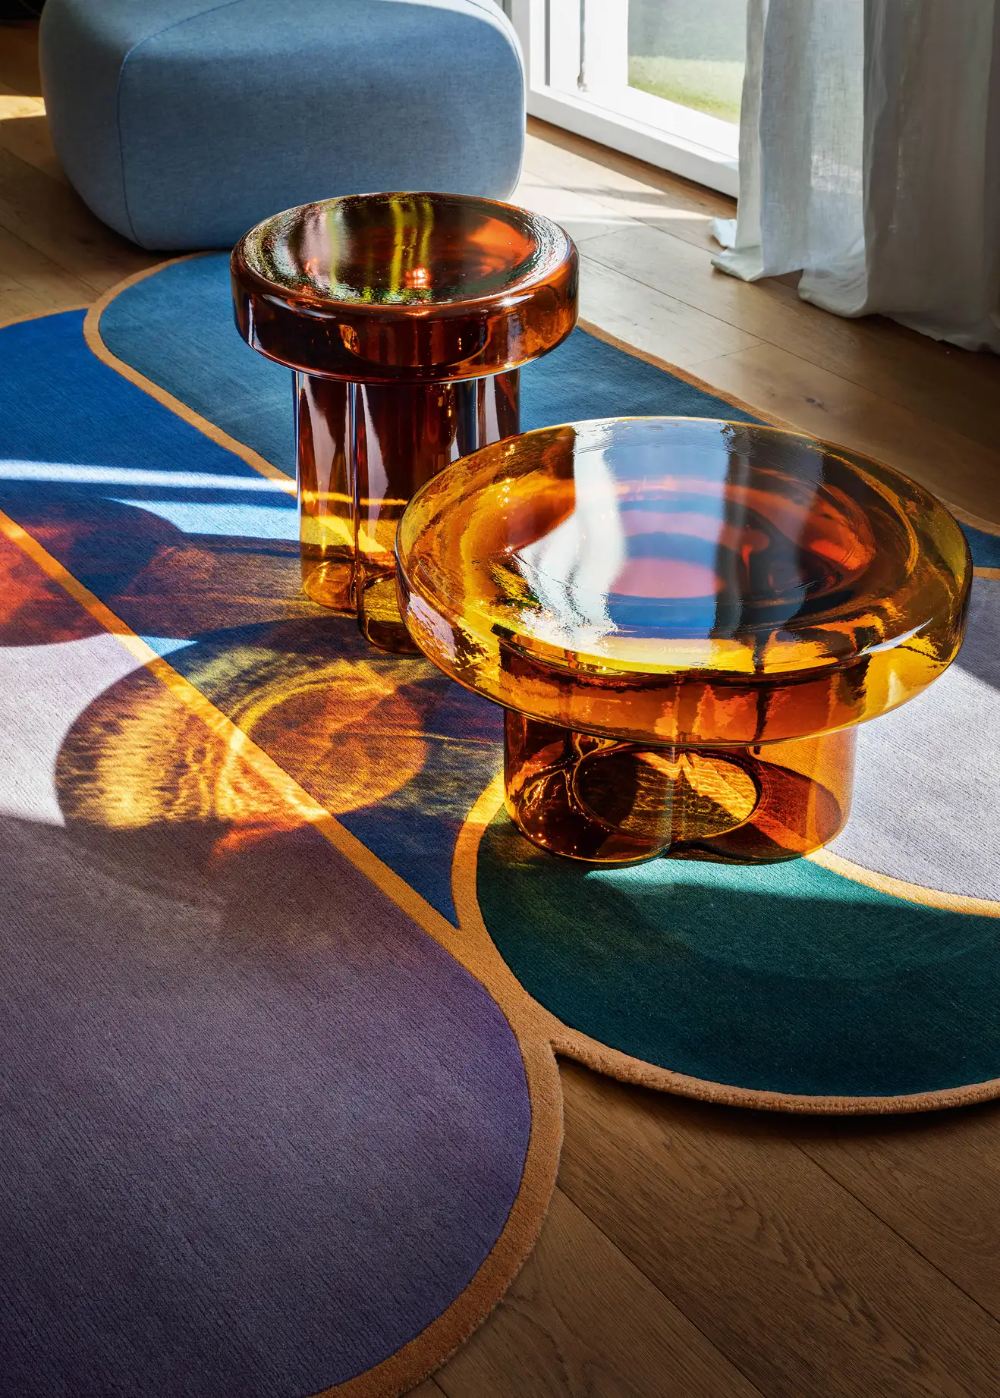 How to Care for Your Glass Table